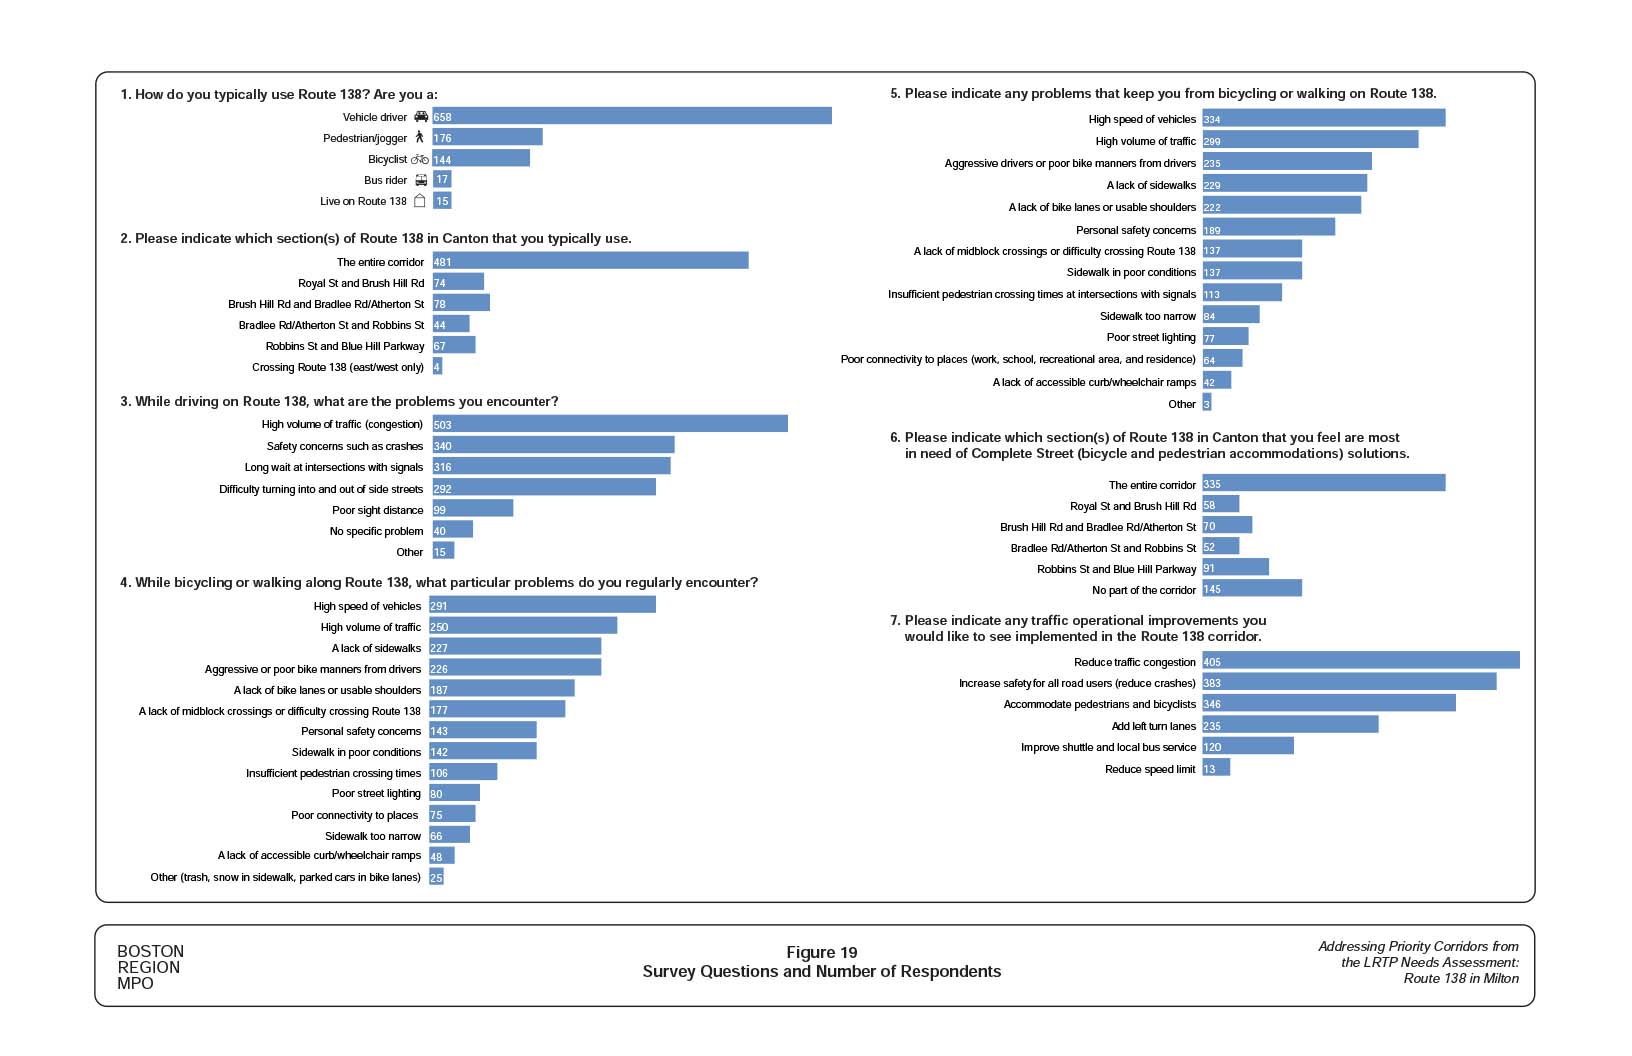 Figure 19 shows the results of a survey of users of Route 138. There are seven questions listed and bar charts showing the answers to the questions and the number of people who selected each answer.